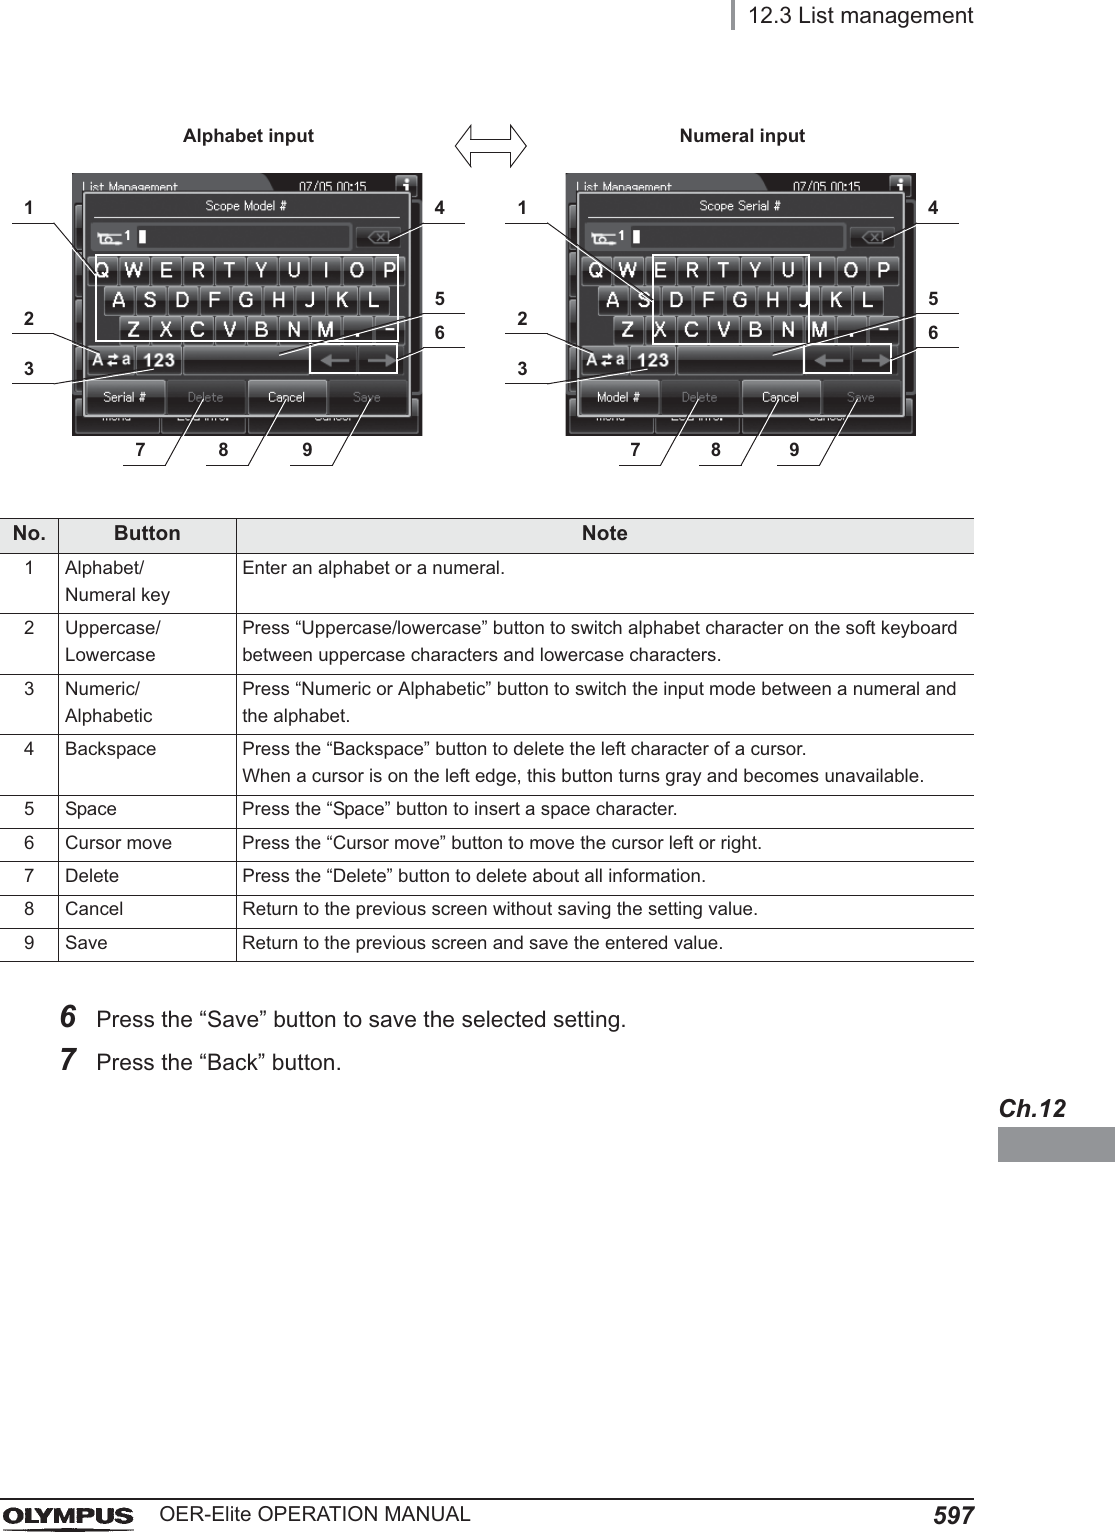 12.3 List management597OER-Elite OPERATION MANUALCh.12No. Button Note1 Alphabet/Numeral keyEnter an alphabet or a numeral.2 Uppercase/LowercasePress “Uppercase/lowercase” button to switch alphabet character on the soft keyboard between uppercase characters and lowercase characters.3 Numeric/AlphabeticPress “Numeric or Alphabetic” button to switch the input mode between a numeral and the alphabet.4 Backspace Press the “Backspace” button to delete the left character of a cursor.When a cursor is on the left edge, this button turns gray and becomes unavailable.5 Space Press the “Space” button to insert a space character.6 Cursor move Press the “Cursor move” button to move the cursor left or right.7 Delete Press the “Delete” button to delete about all information.8 Cancel Return to the previous screen without saving the setting value.9 Save Return to the previous screen and save the entered value.6Press the “Save” button to save the selected setting.7Press the “Back” button.4123568 94123568 9Alphabet input Numeral input7 7